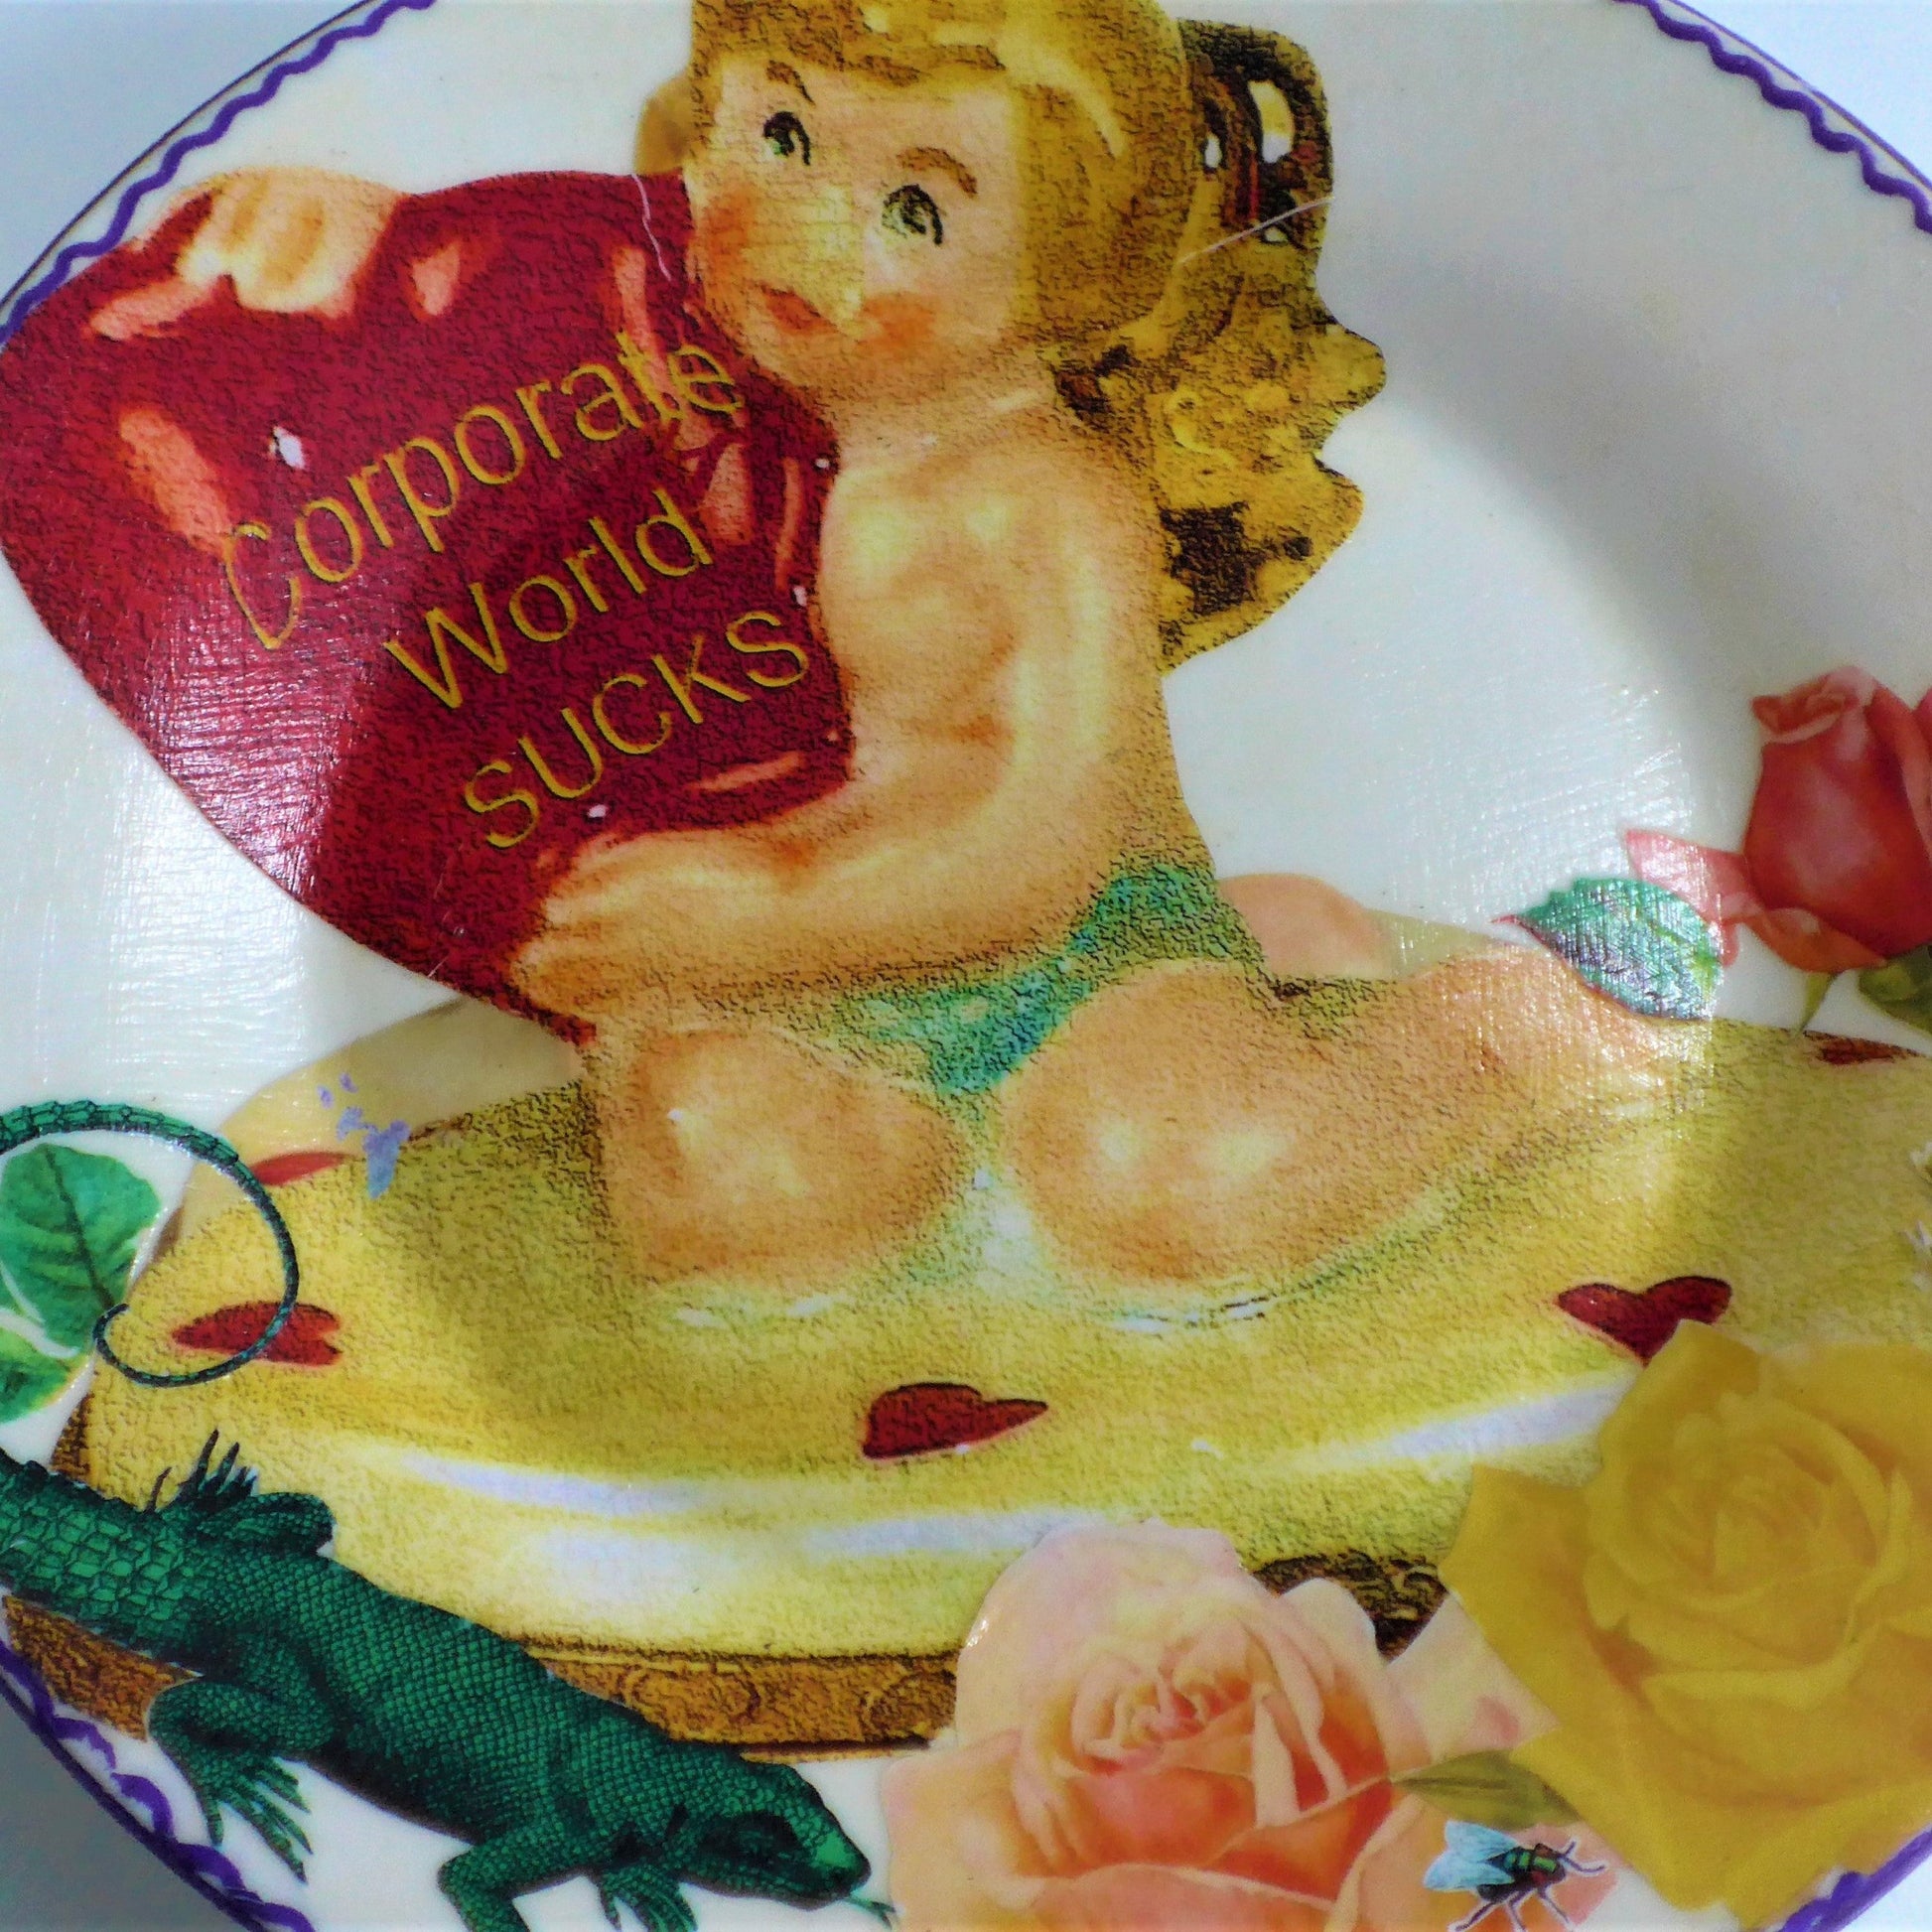 House of Frisson "Corporate World Sucks" Off White Wall Plate Front. Collage artwork featuring a kitsch angel figure holding a heart, among roses, a lizard, and a fly. Closeup detail of the angel figure.